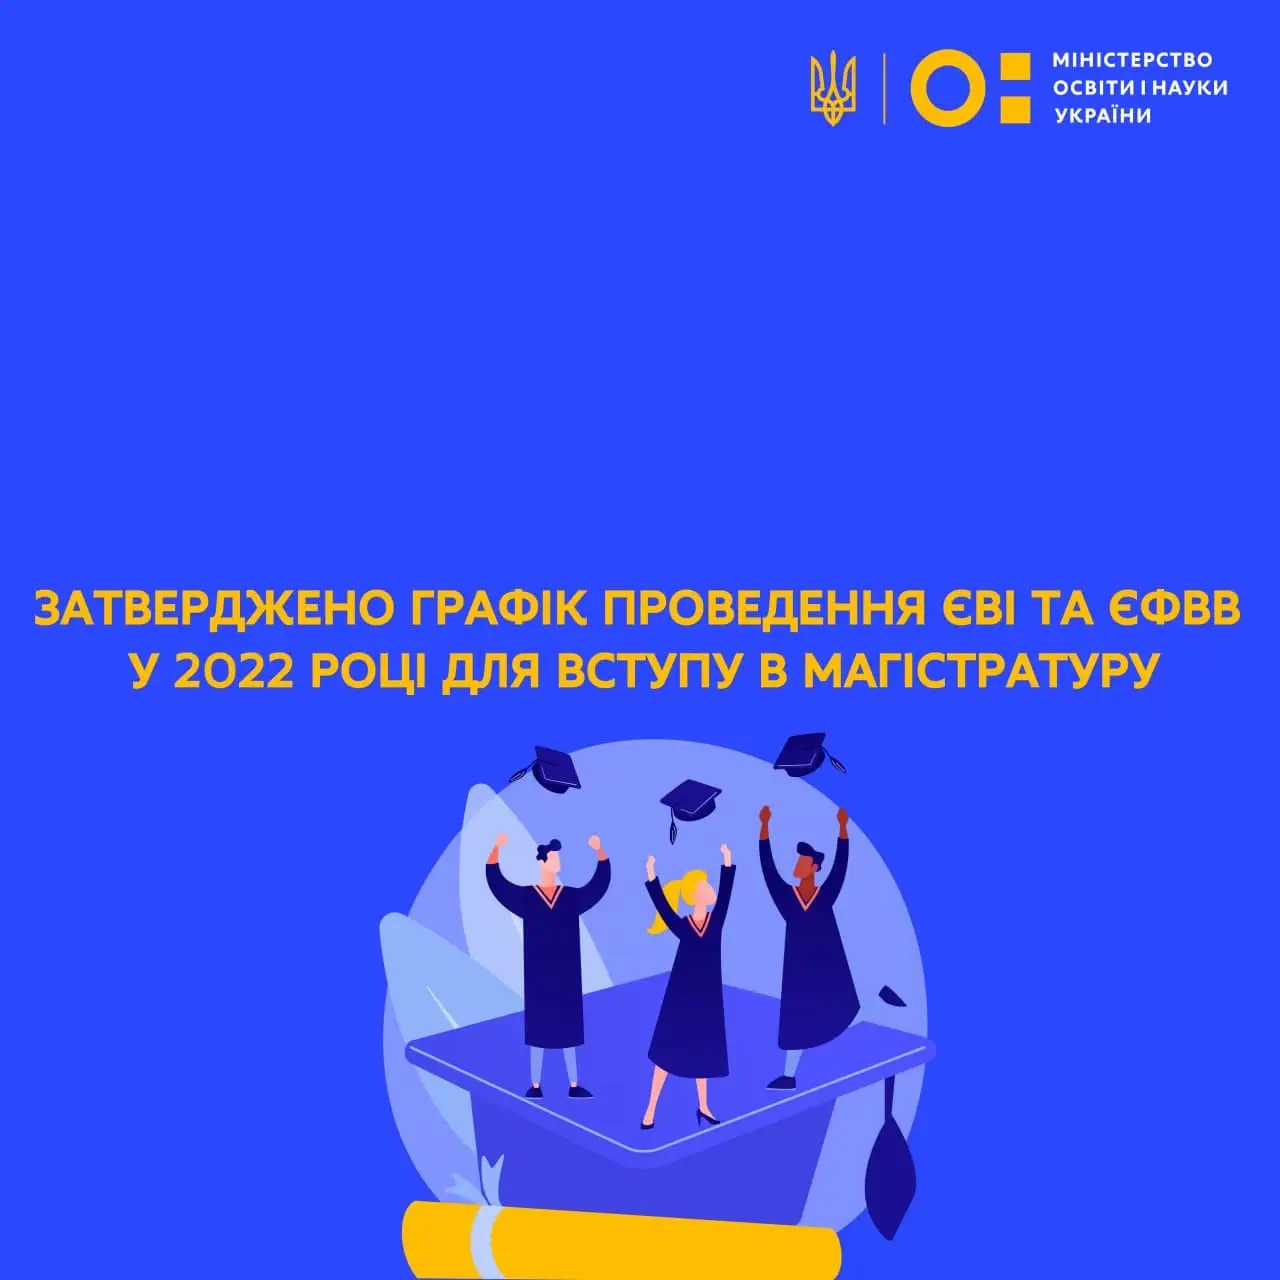 The schedule of UEE and UPEE for admission to the master’s program is approved